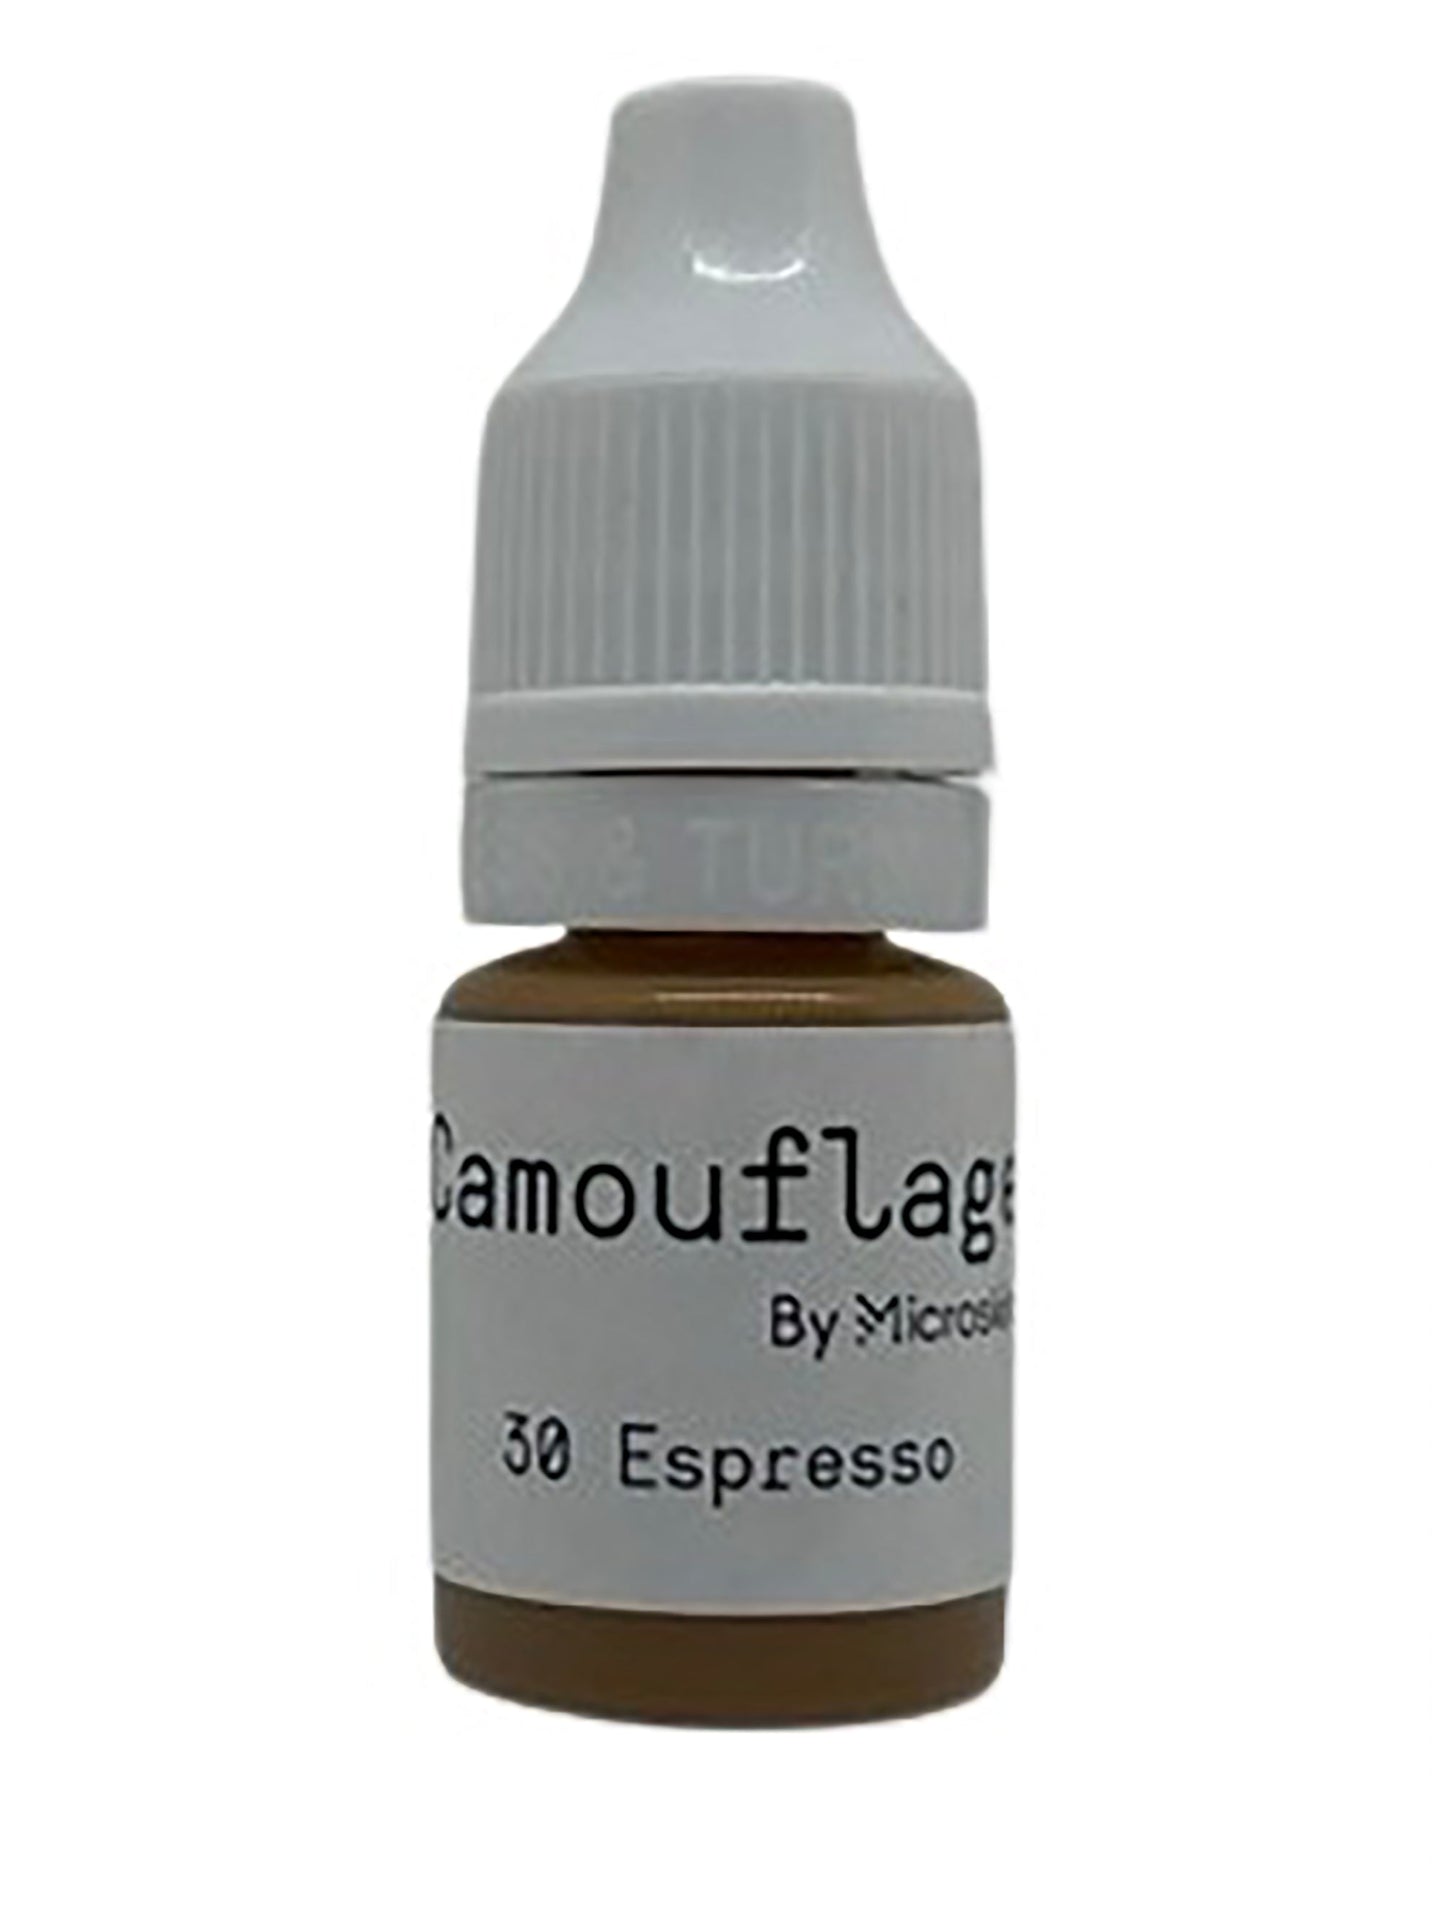 5mL Sample - Camouflage By Microskin™